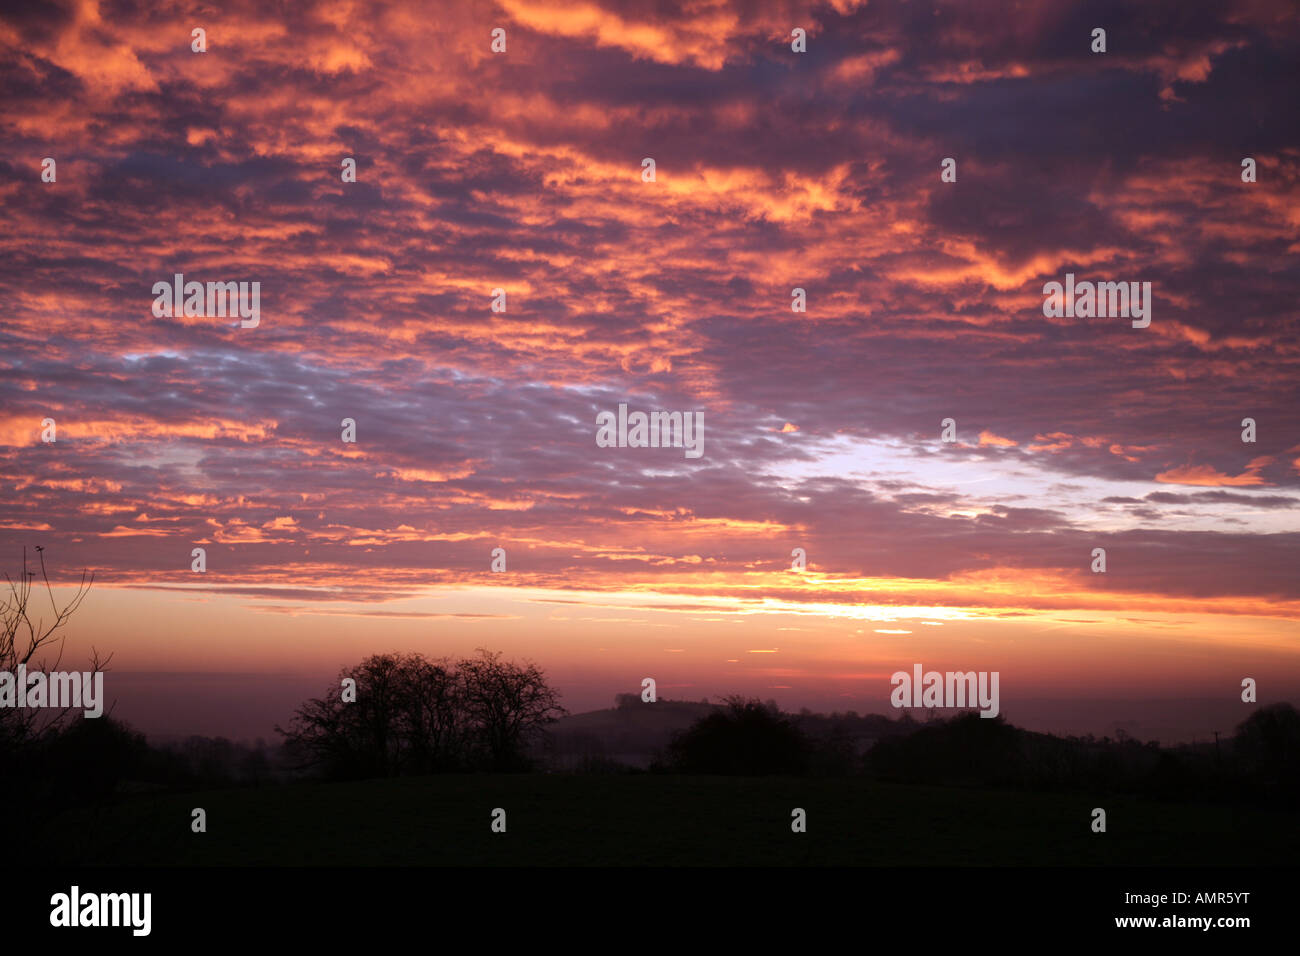 dawn skies over Drumlin country County Monaghan Ireland Stock Photo